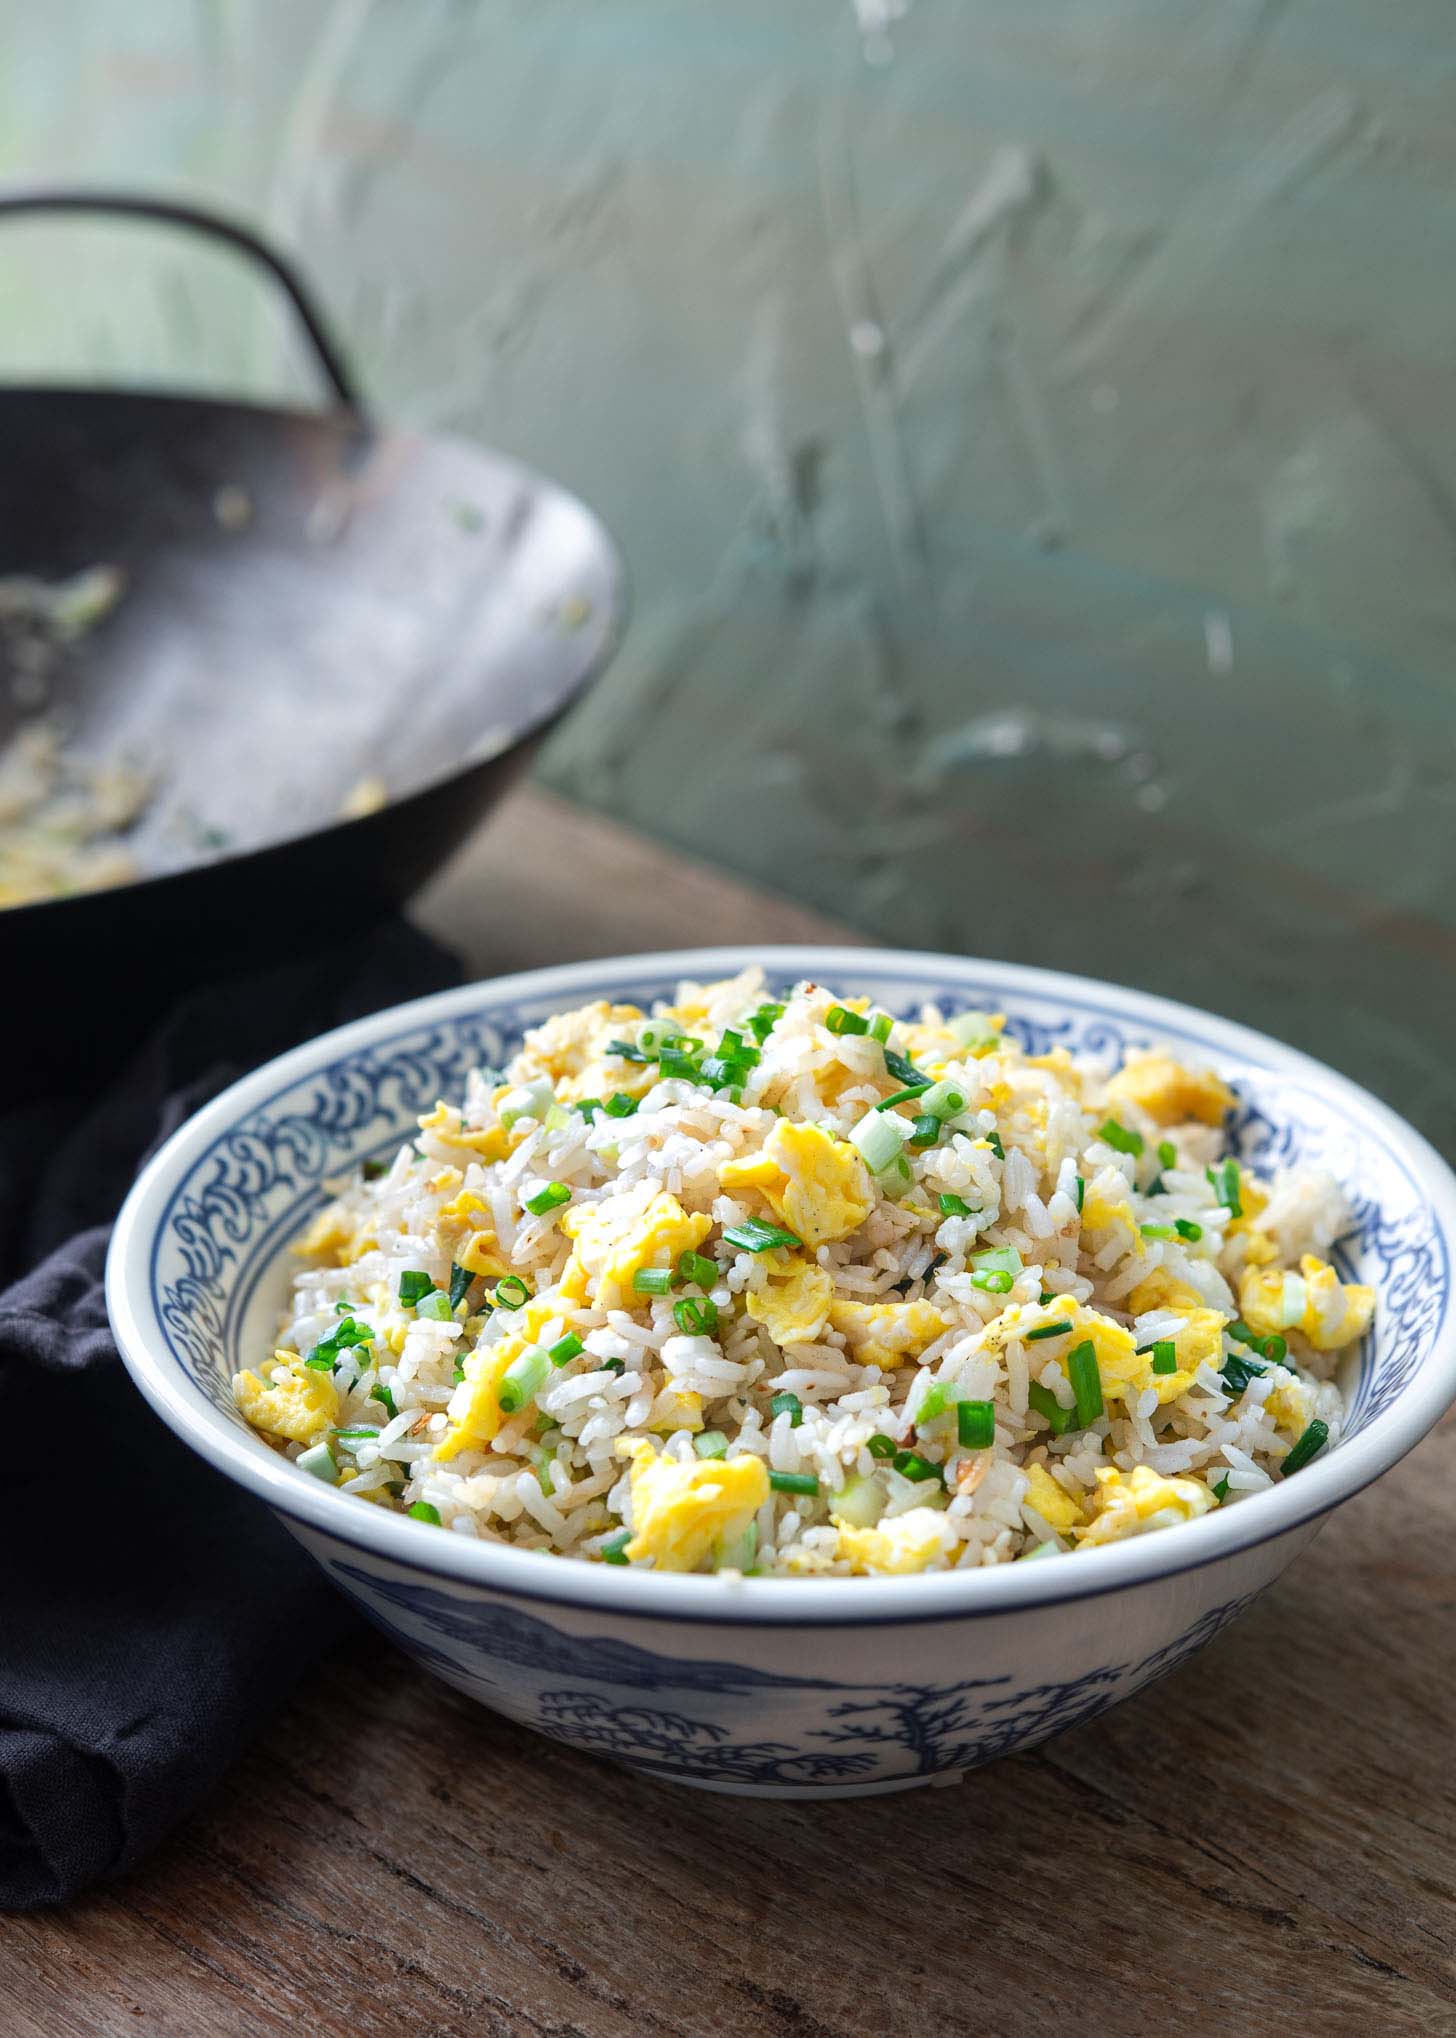 Egg fried rice in a blue and white serving bowl.